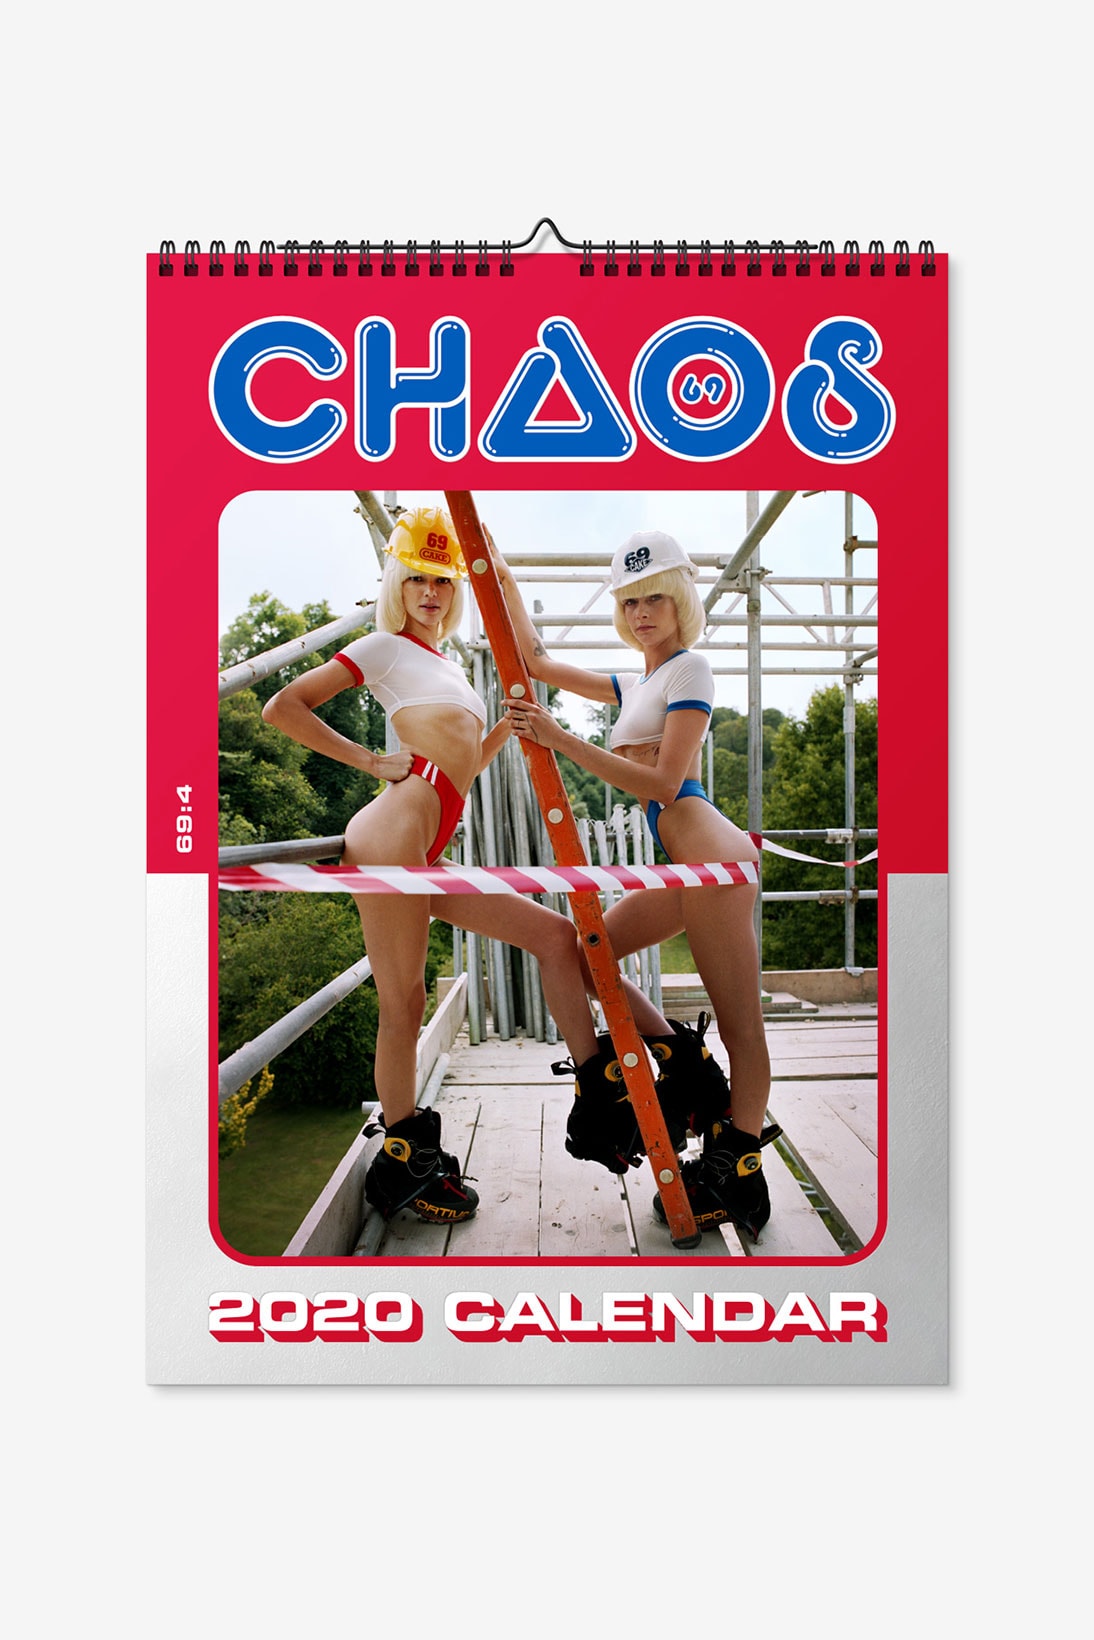 chaos sixtynine kendall jenner cara delevingne 2020 calendar cake recipes editorial